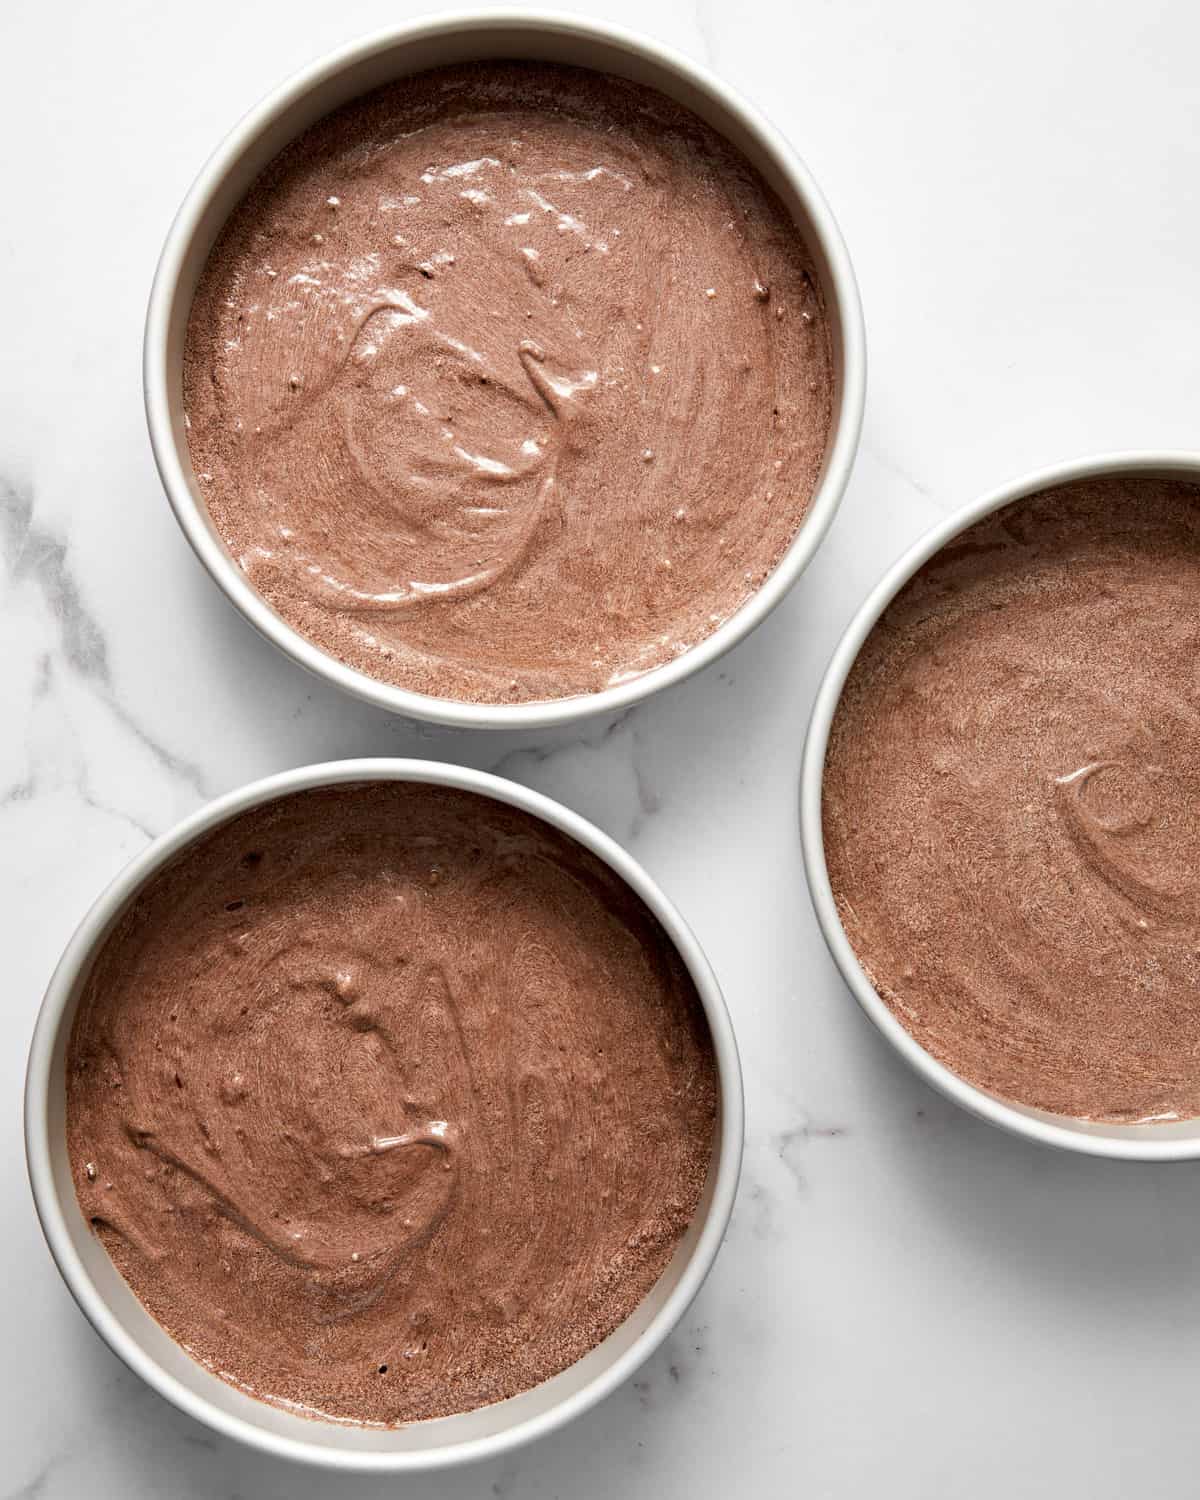 red wine chocolate cake batter in 3 cake pans.